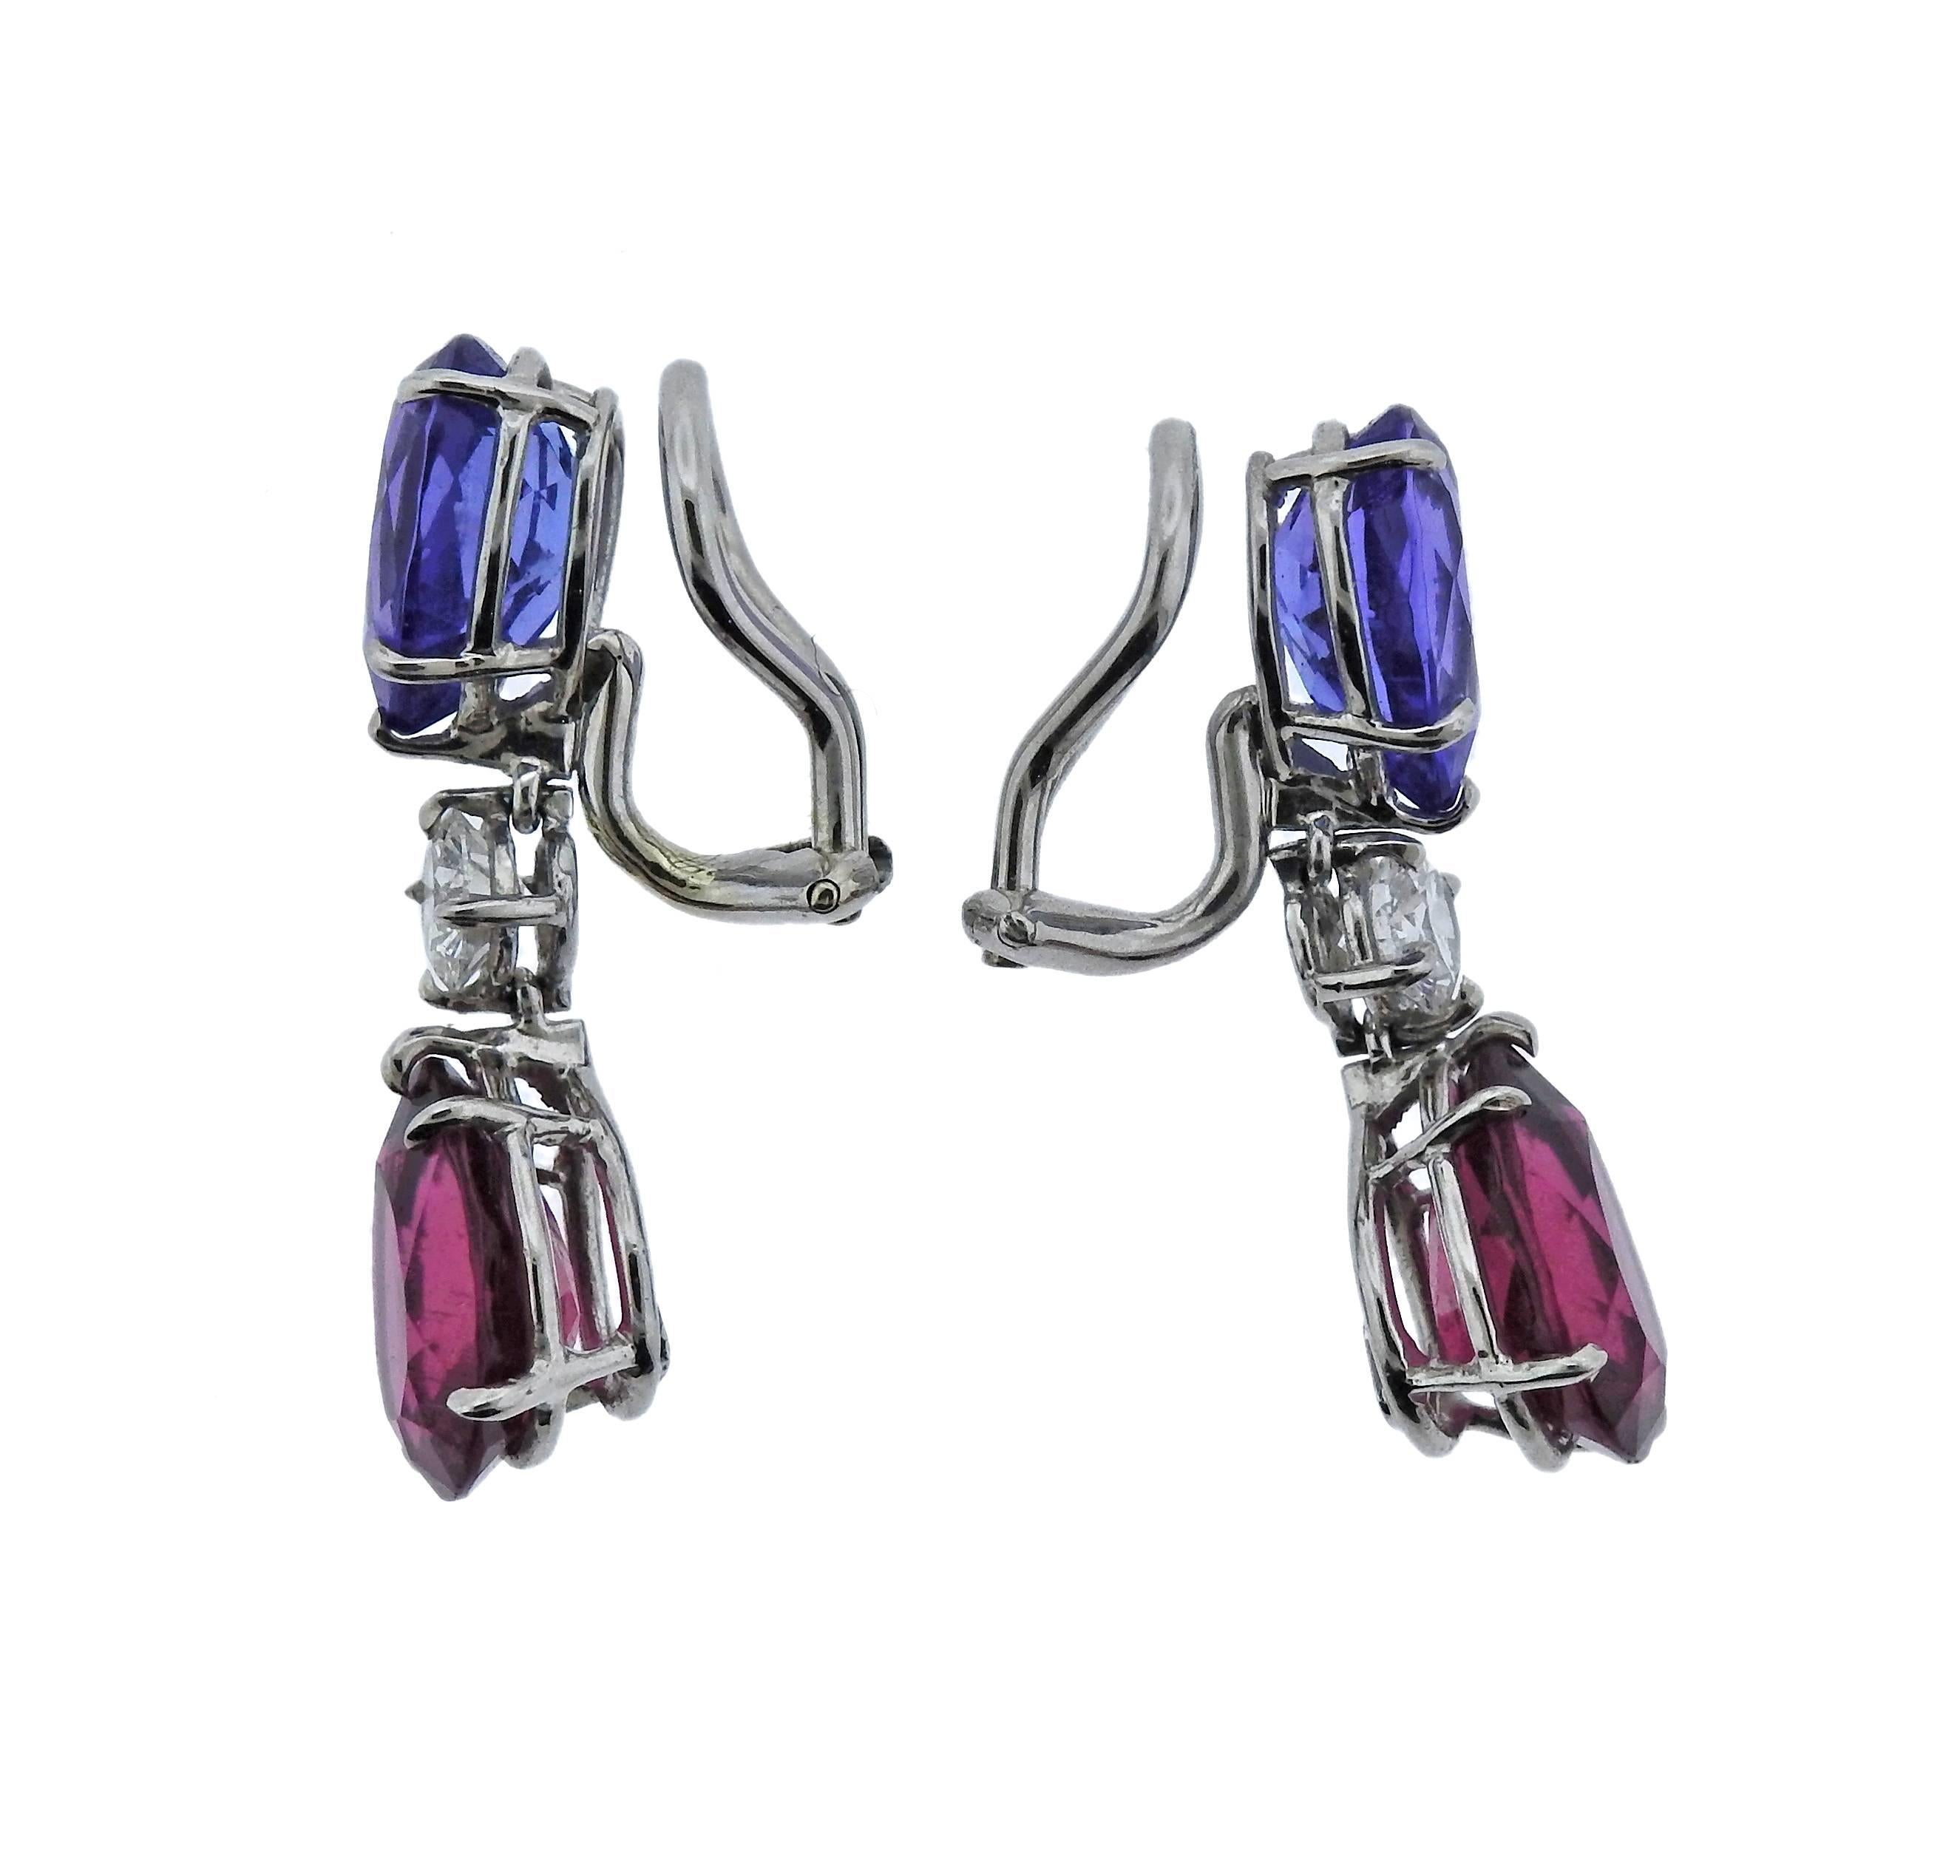 Pair of delicate and vibrant platinum drop earrings, crafted by Donna Vock, set with teardrop pink tourmaline and tanzanite, adorned with approx. 0.65-0.70ctw in G/VS diamonds. Earrings are 28mm x 8mm, weigh 7.6 grams. Marked: Vock and pt950.